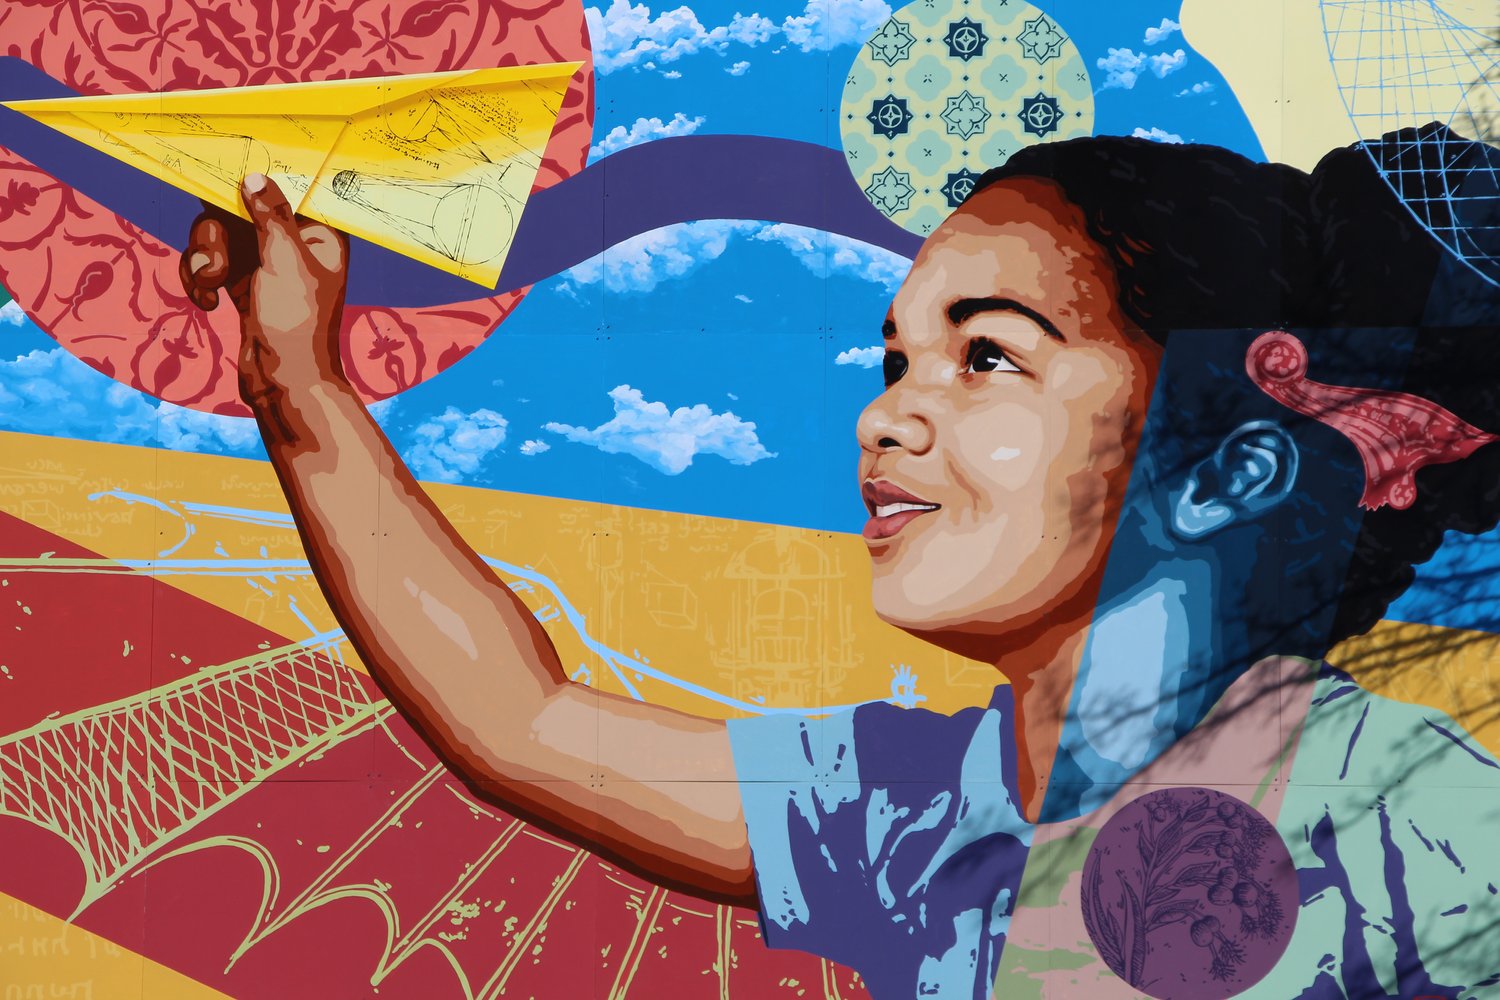 Colorful mural depicting a young child poised to throw a paper airplane